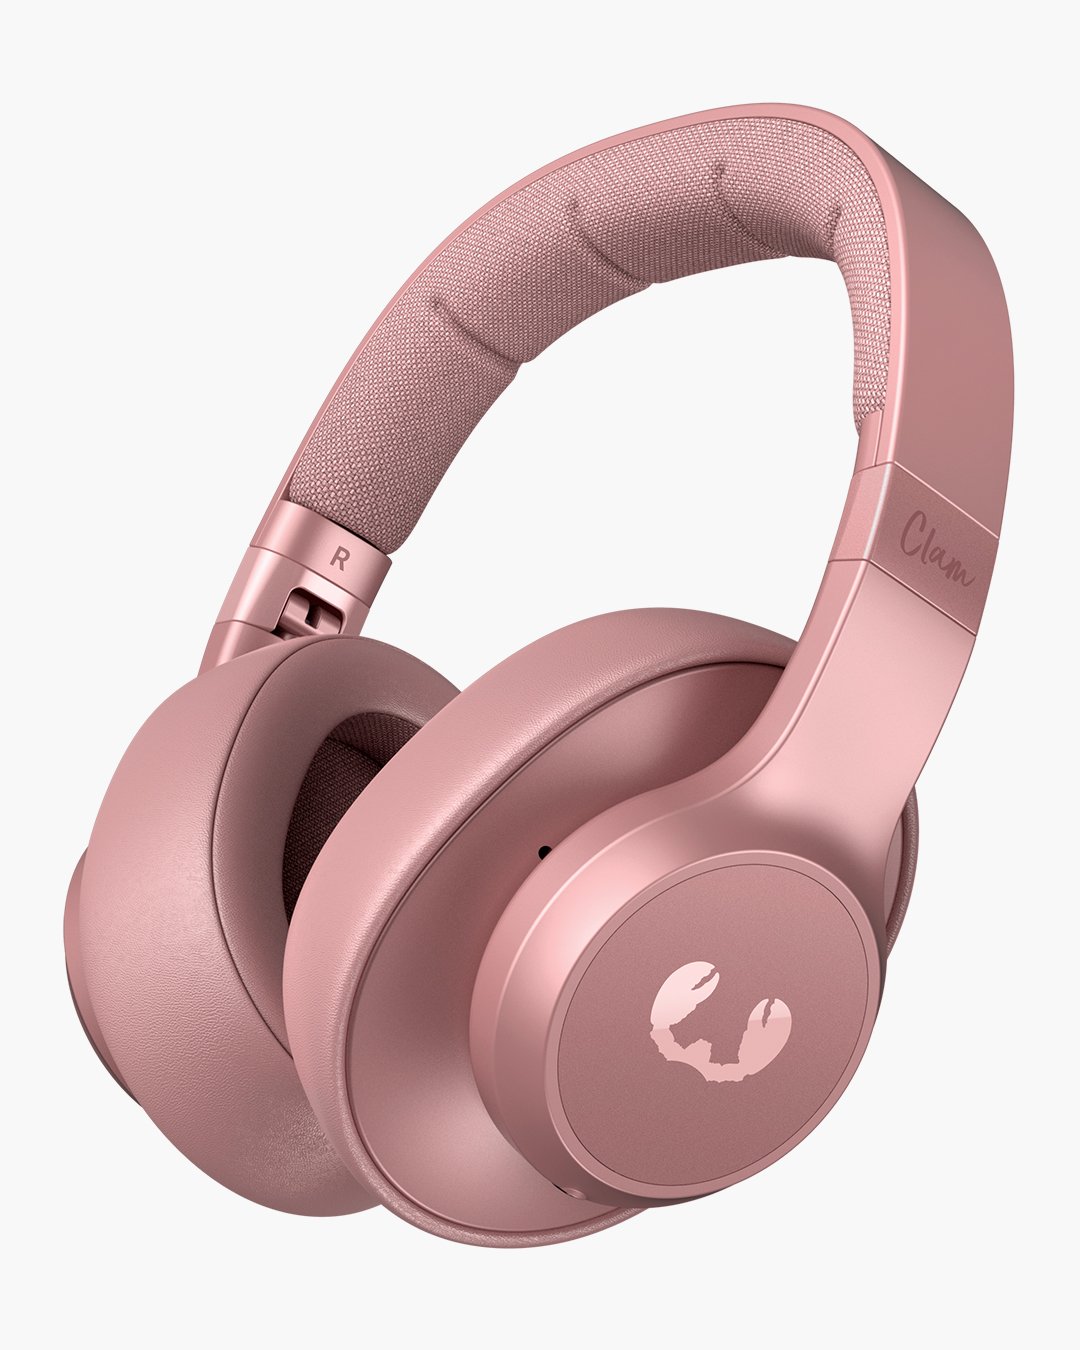 Fresh 'n Rebel - Clam ANC - Wireless over-ear headphones with active noise cancelling - Dusty Pink